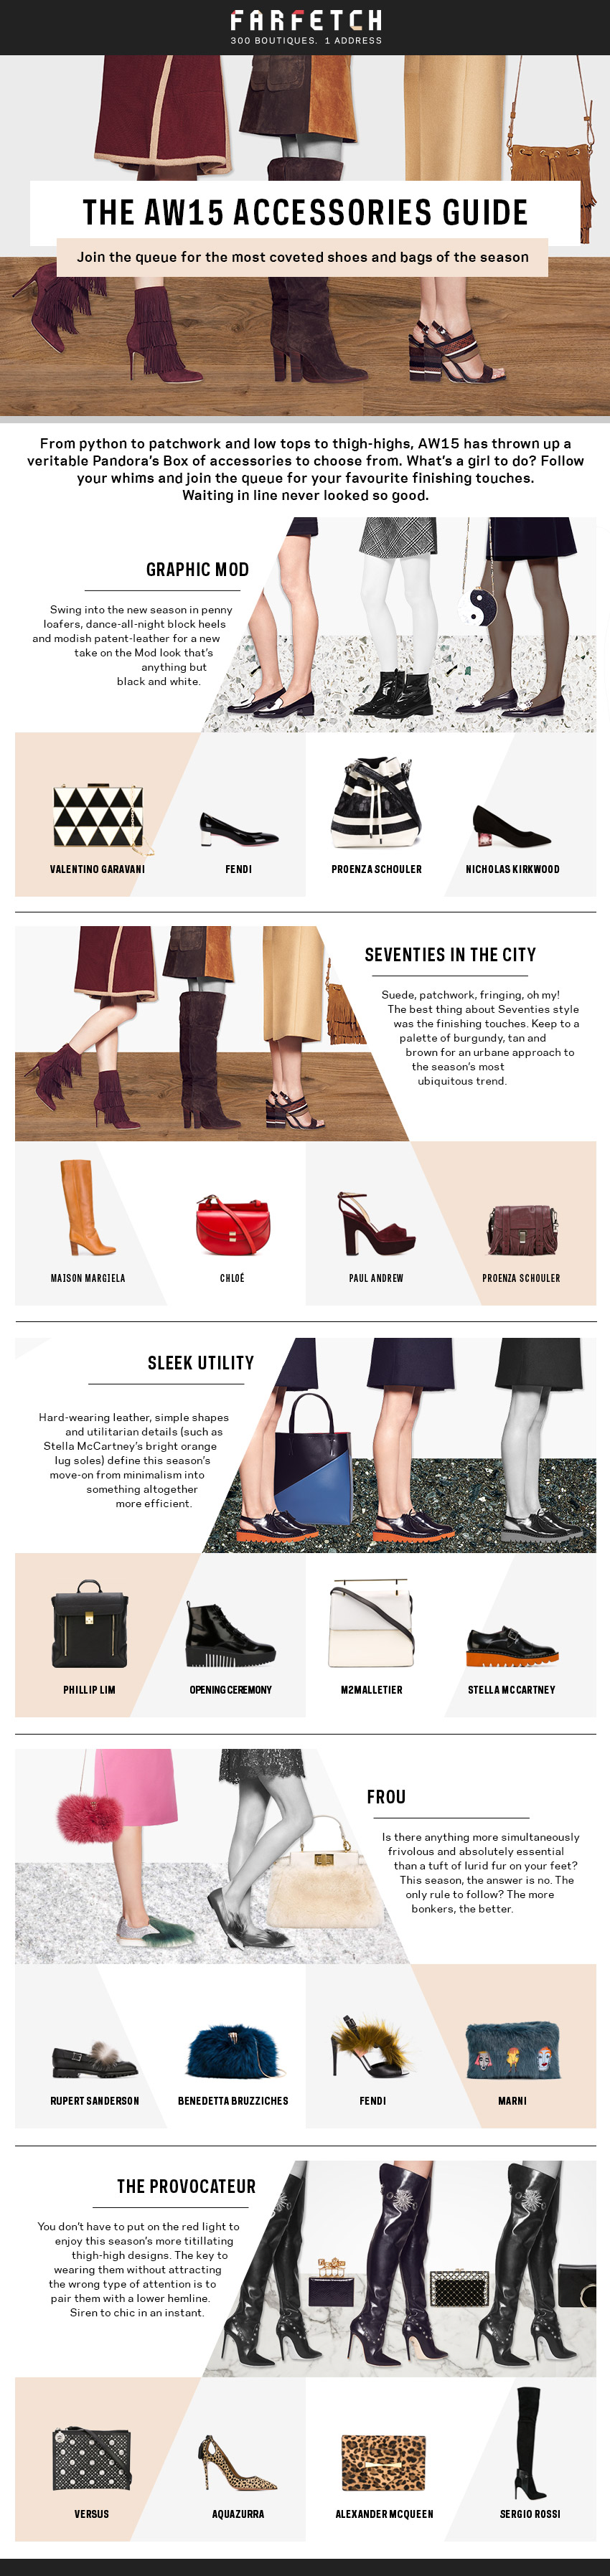 The AW15 Accessories Guide